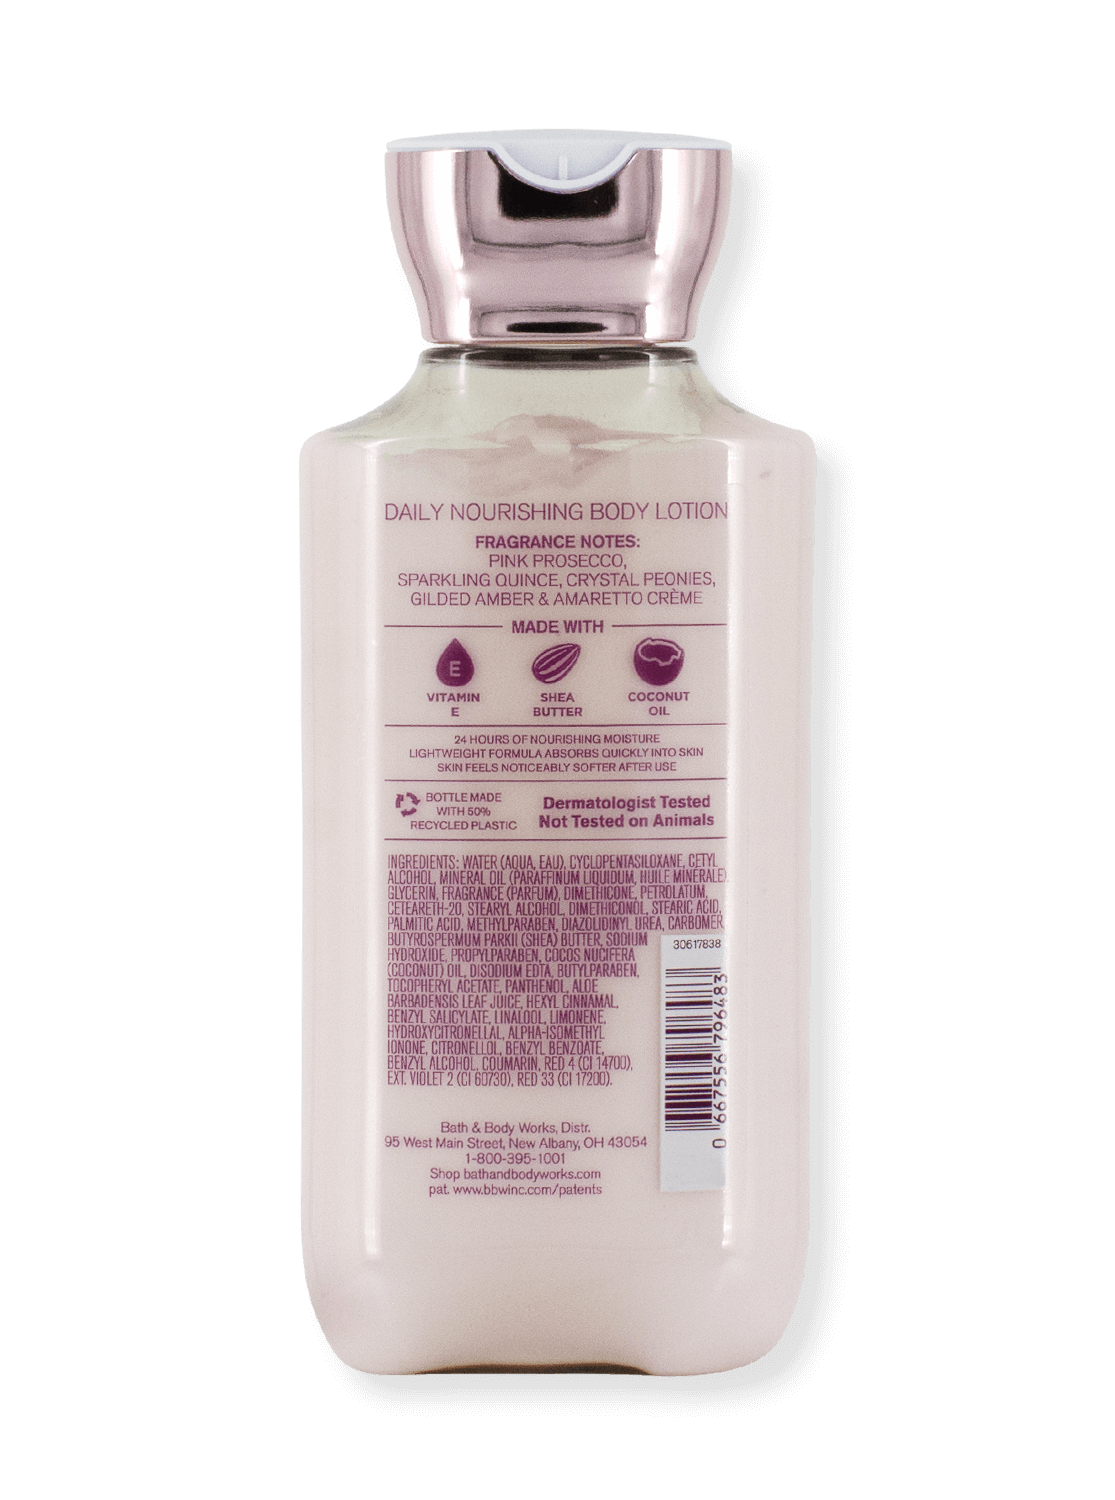 Body Lotion - A Thousand Wishes - 236ml